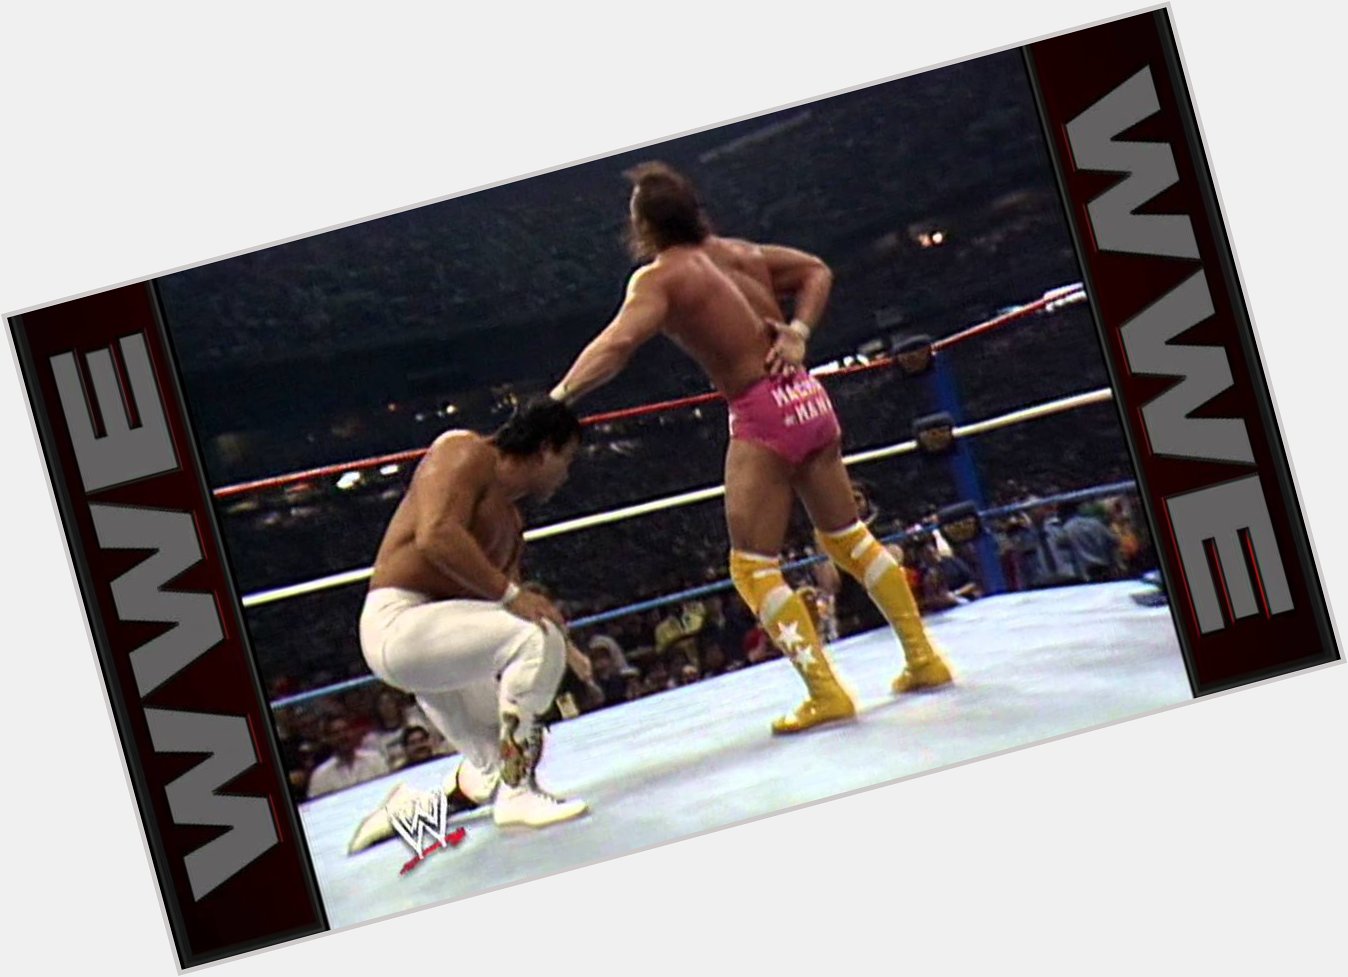 CagesideSeats This Day in Wrestling History (Feb. 28): Happy Birthday Ricky Steamboat!  